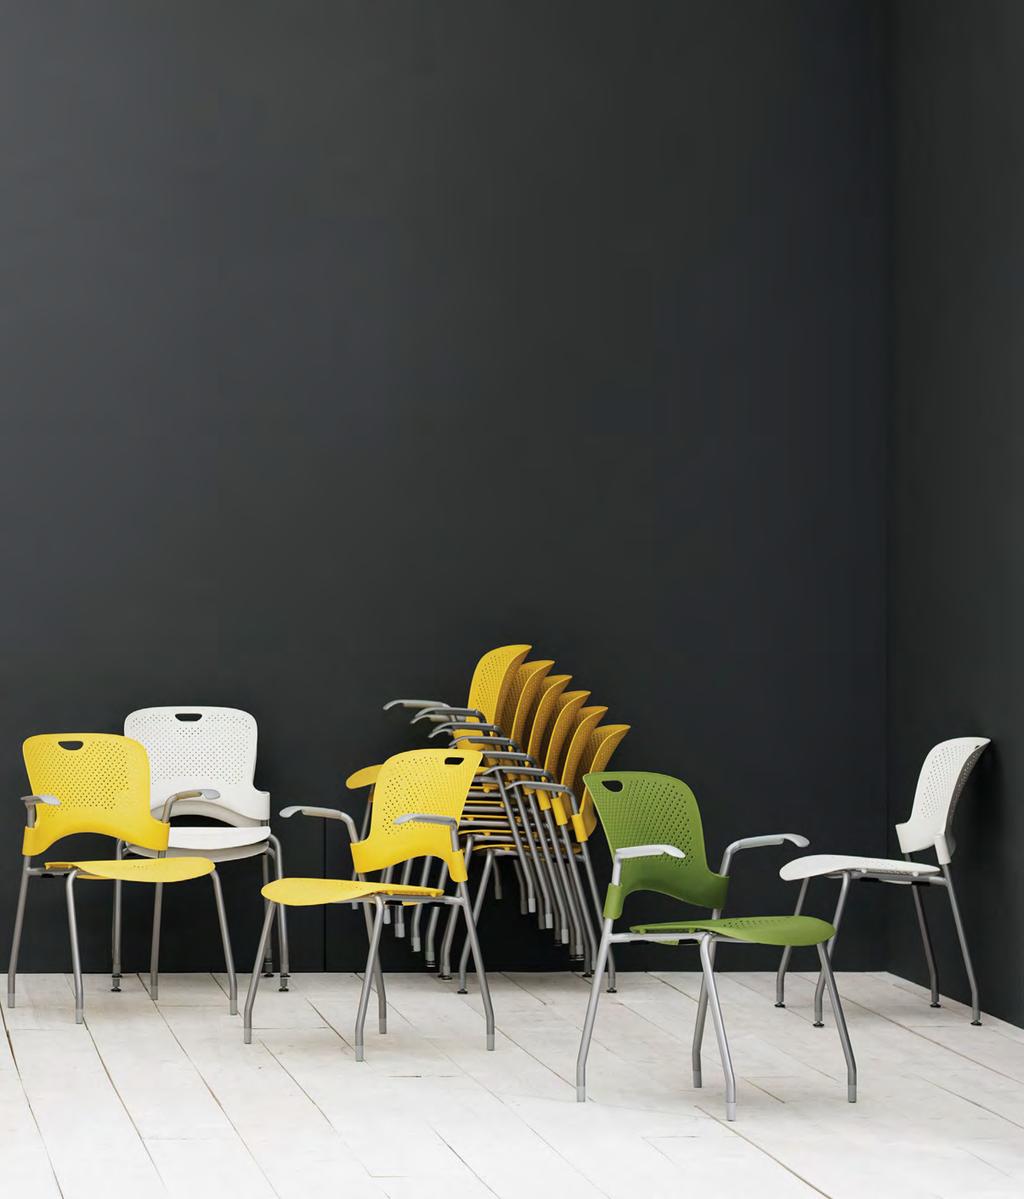 Energizing Spaces, Helping People Great chairs can be tools for activating a workspace, providing